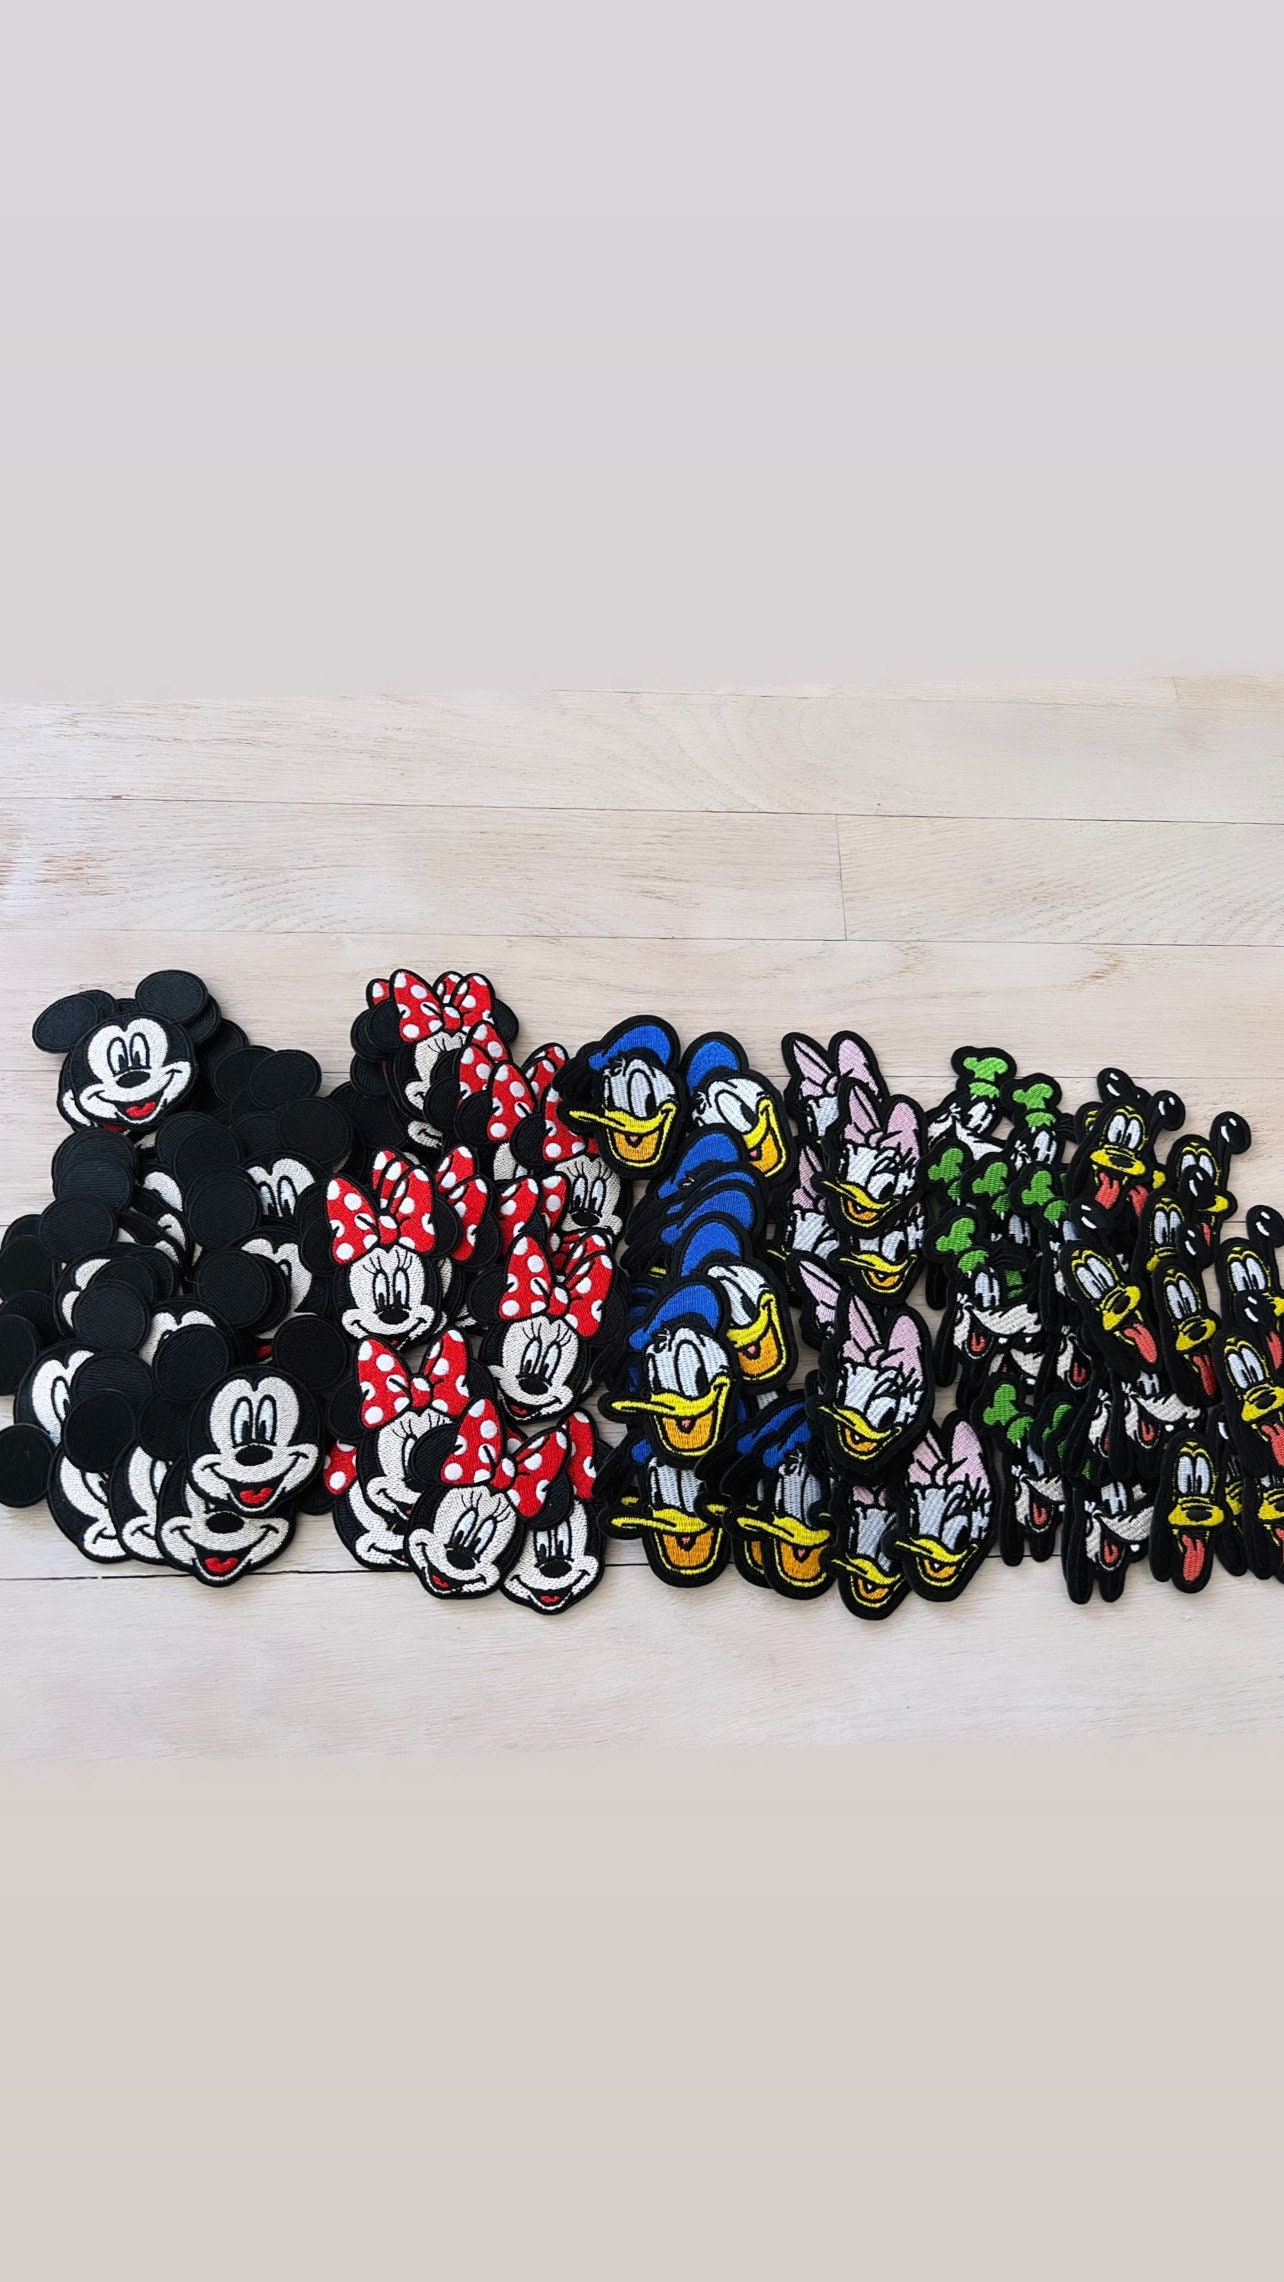 Disney Mickey Mouse 9.5 chenille sew on patch